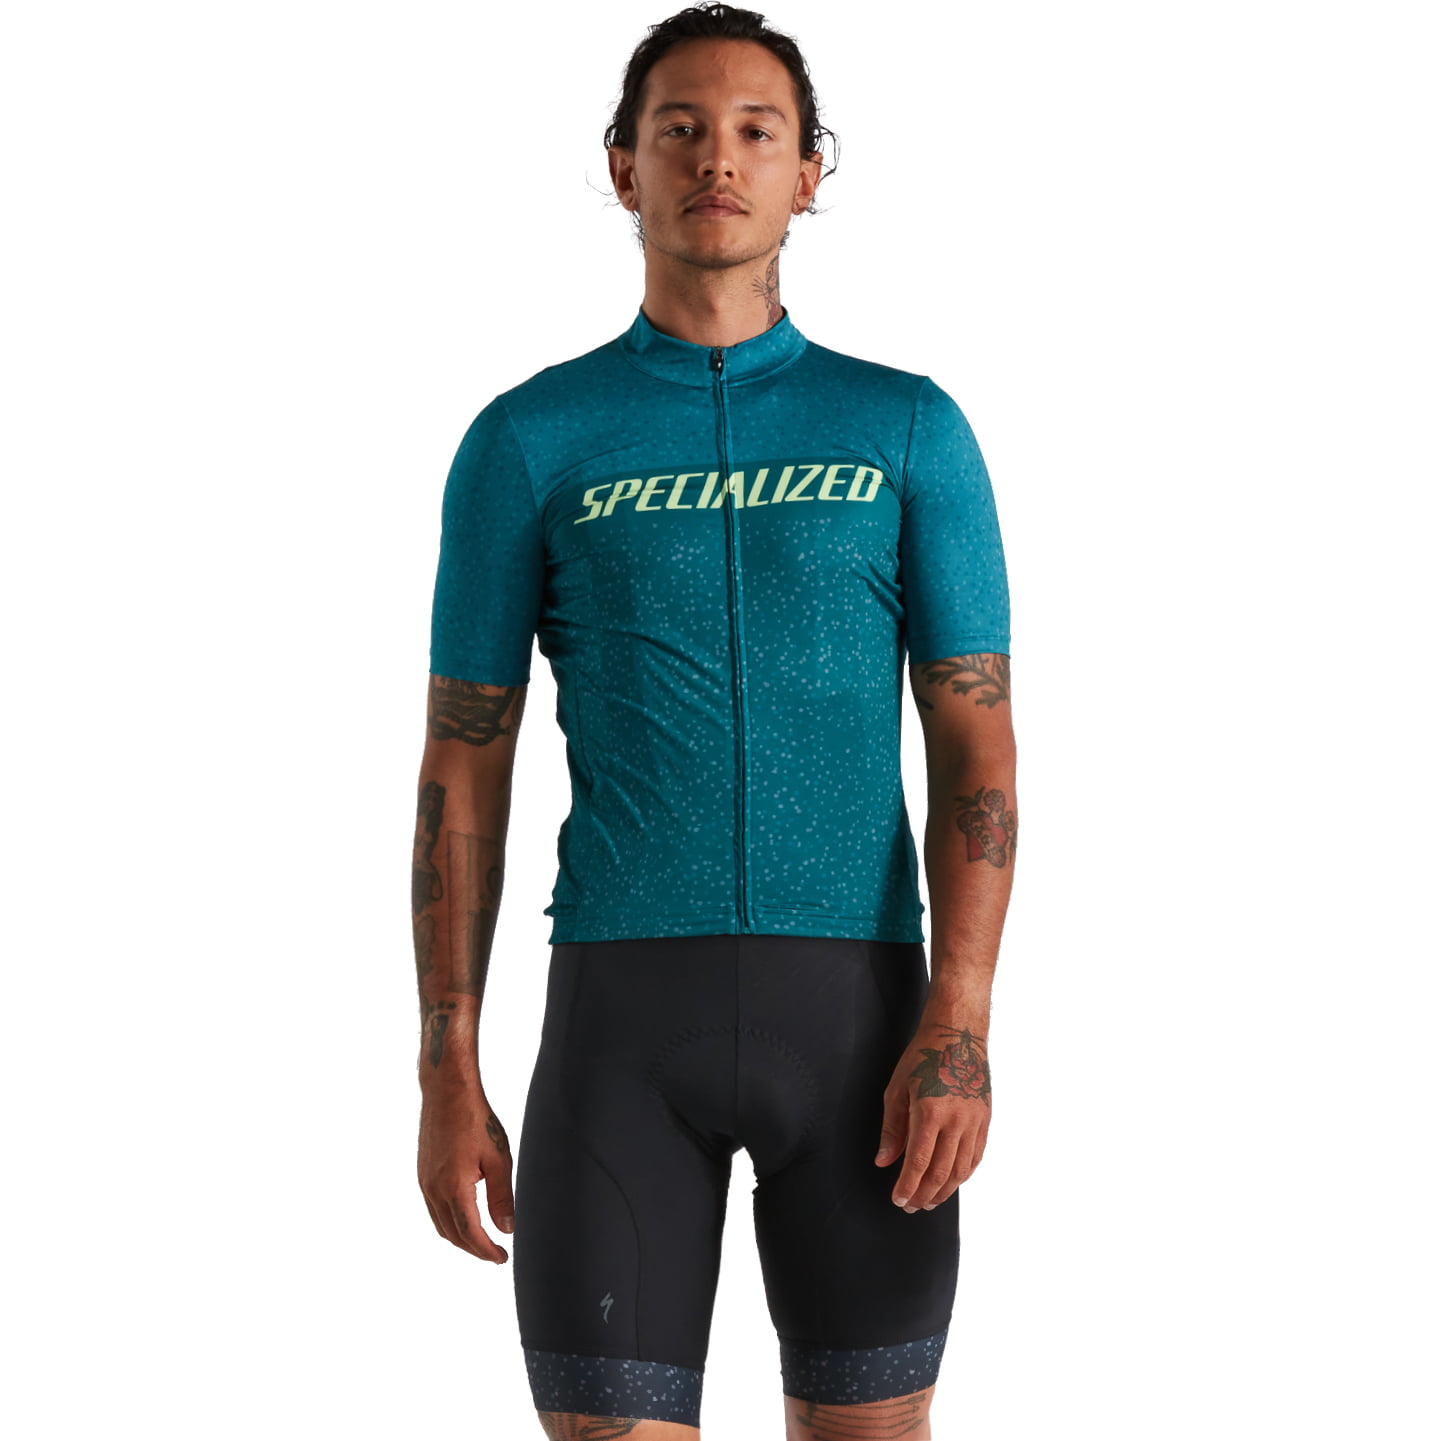 SPECIALIZED RBX Logo Set (cycling jersey + cycling shorts) Set (2 pieces), for men